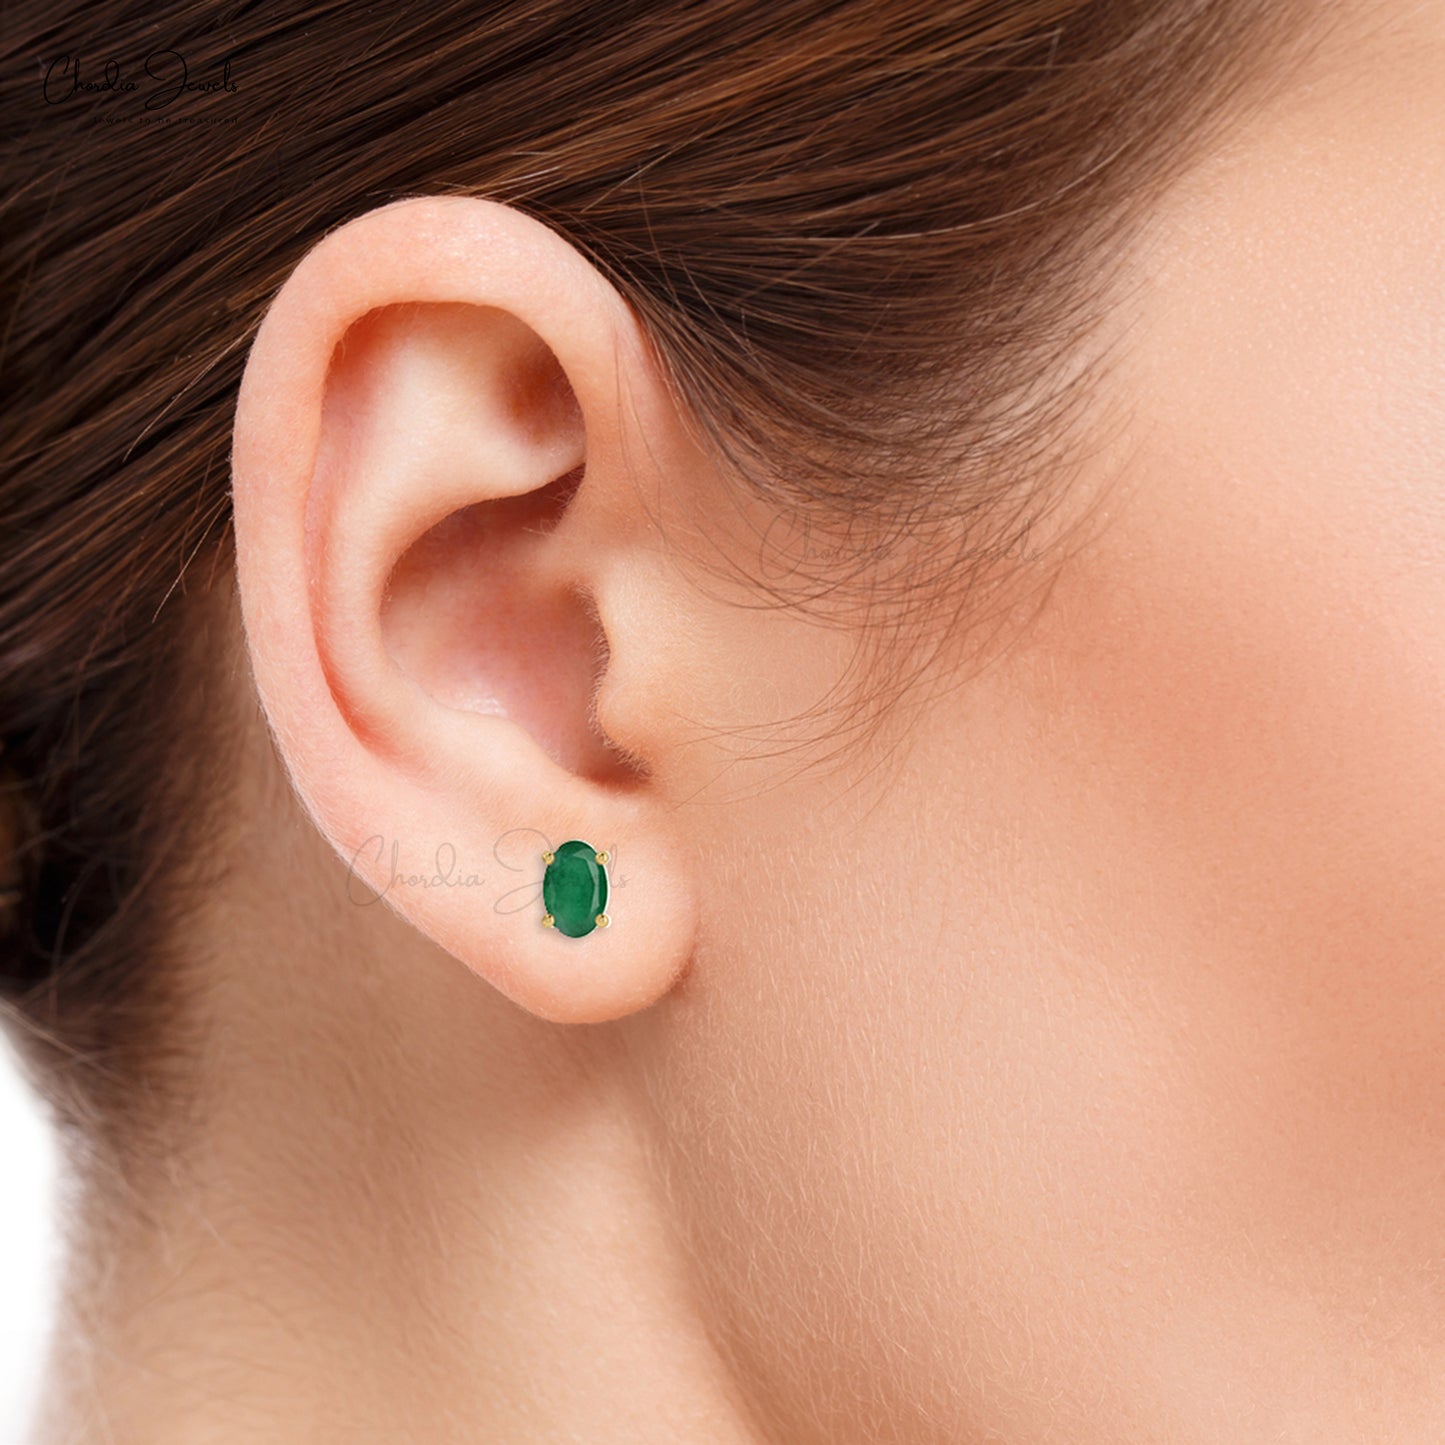 Delicate Emerald Solitaire Earrings 14k Real Gold Push Back Studs For Bridesmaid Gift